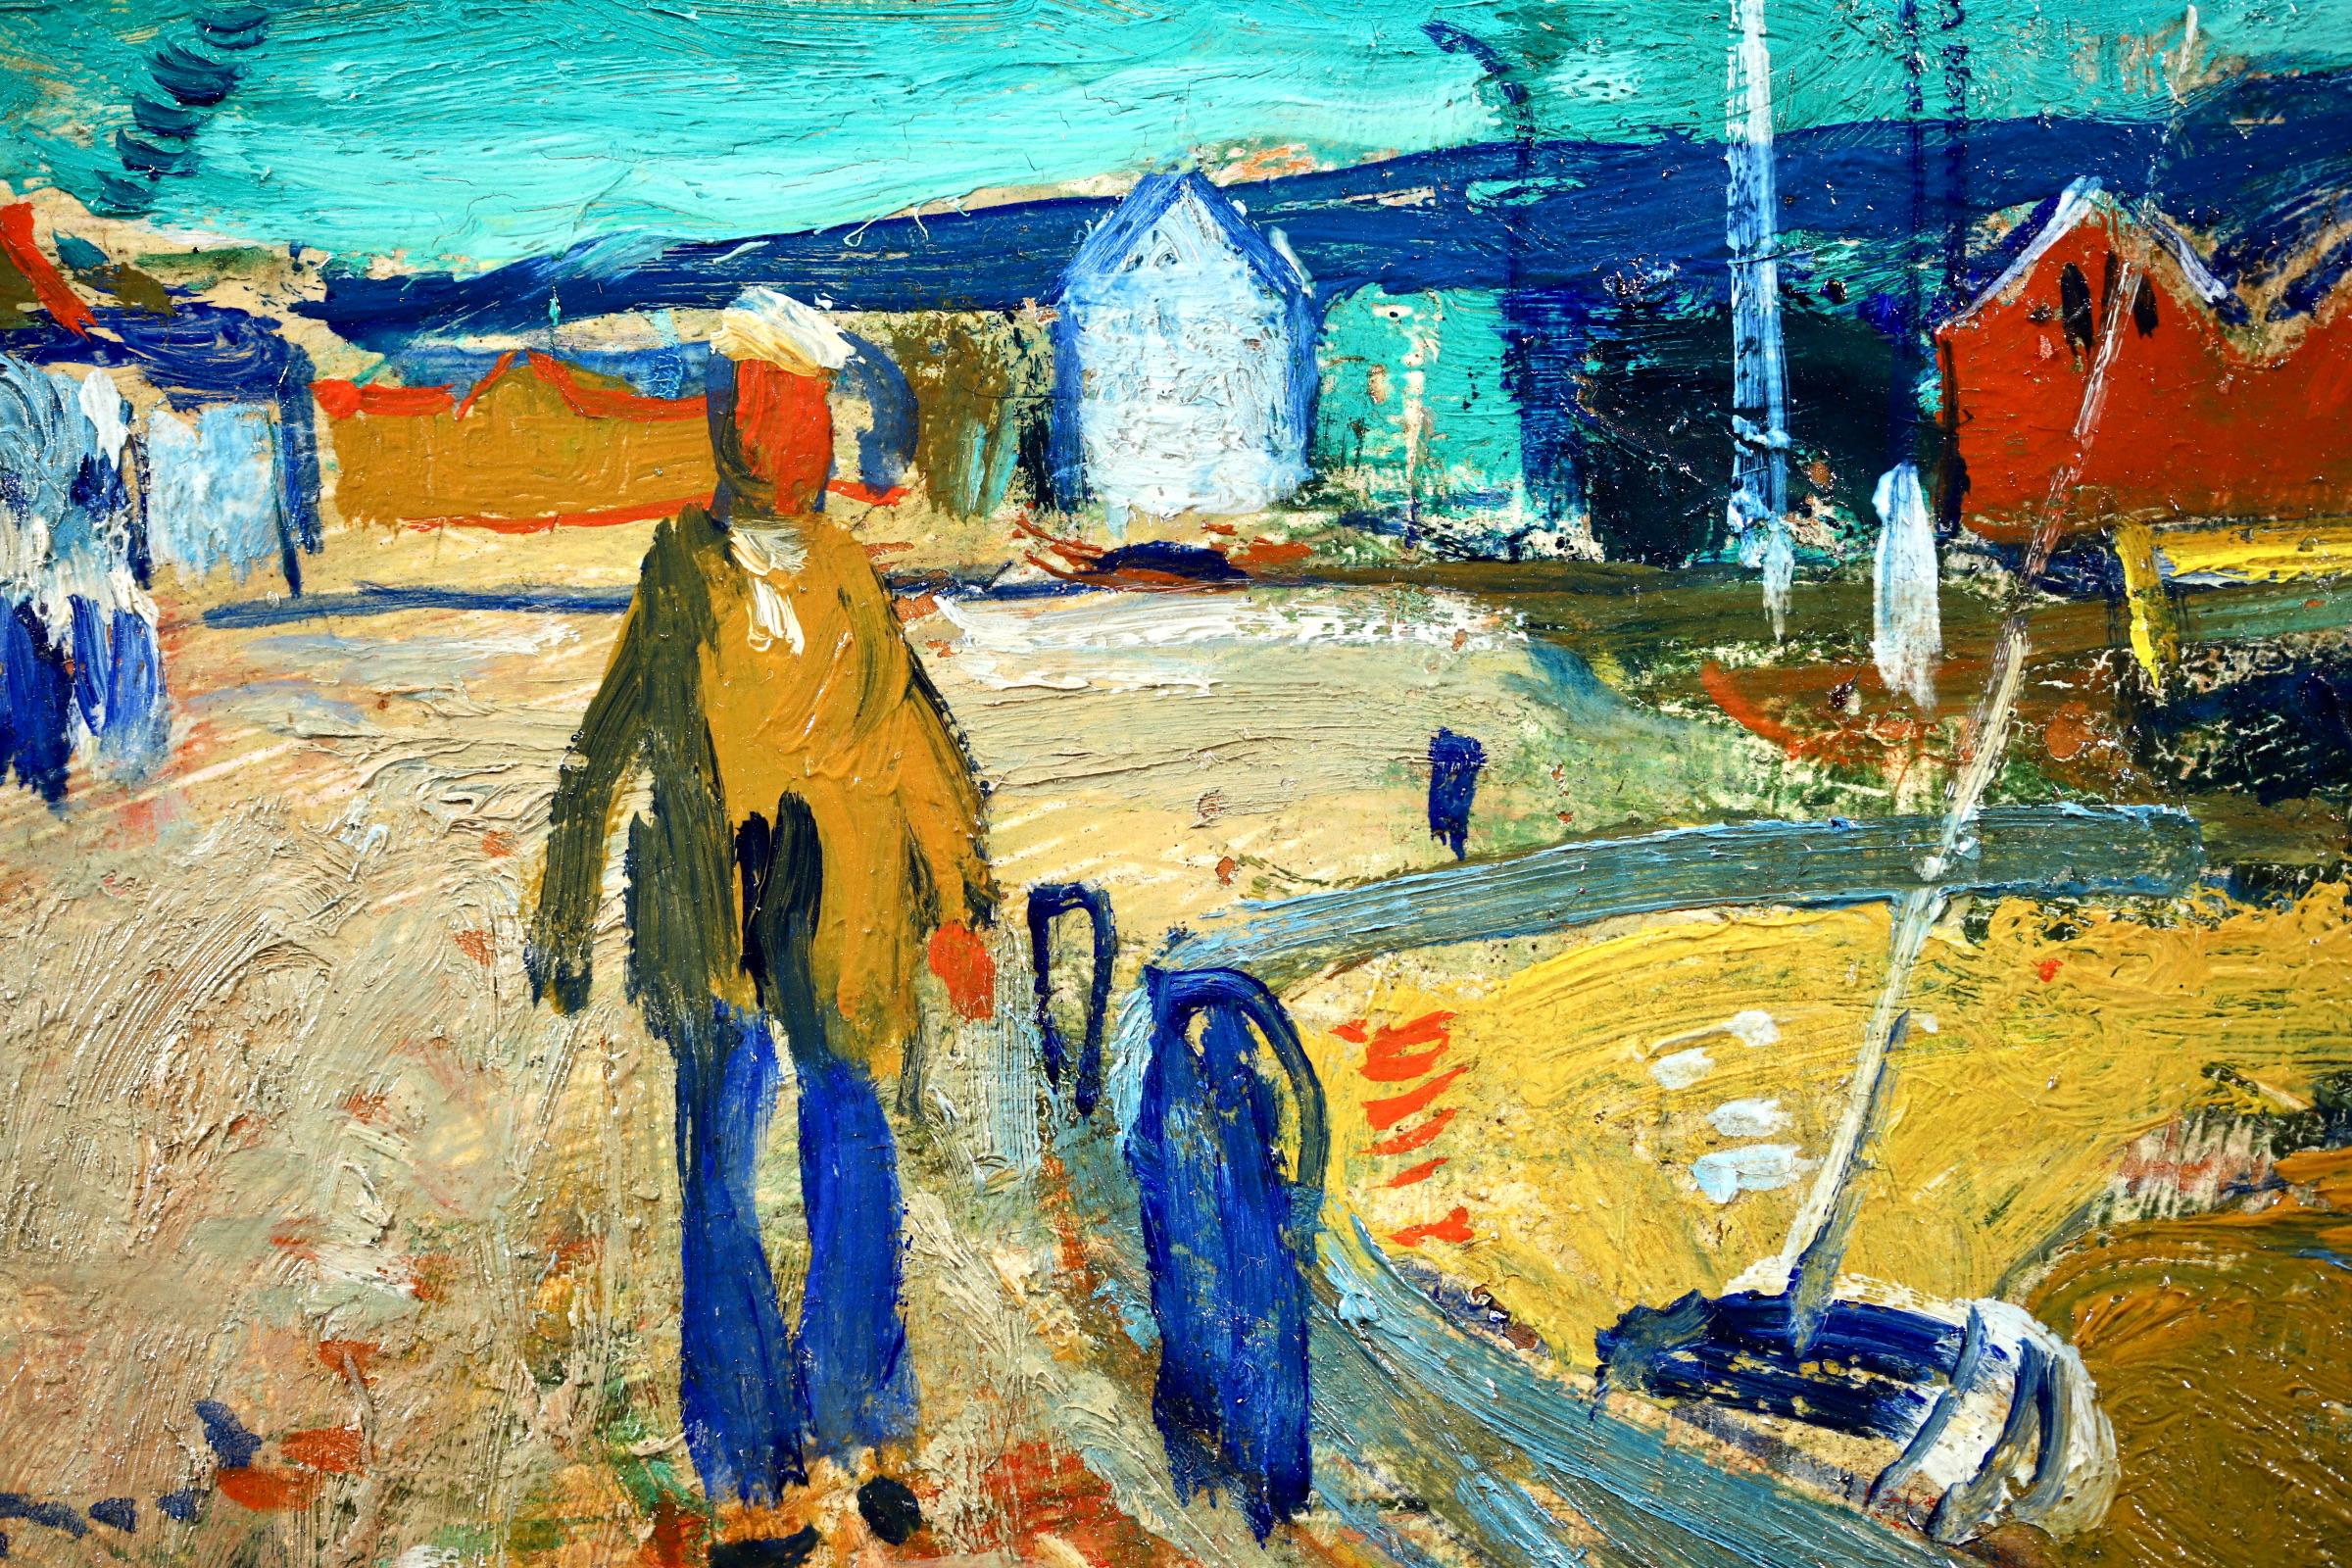 Harbour - Camaret - Post Impressionist Oil Figure in Landscape by Francois Gall - Post-Impressionist Painting by François Gall